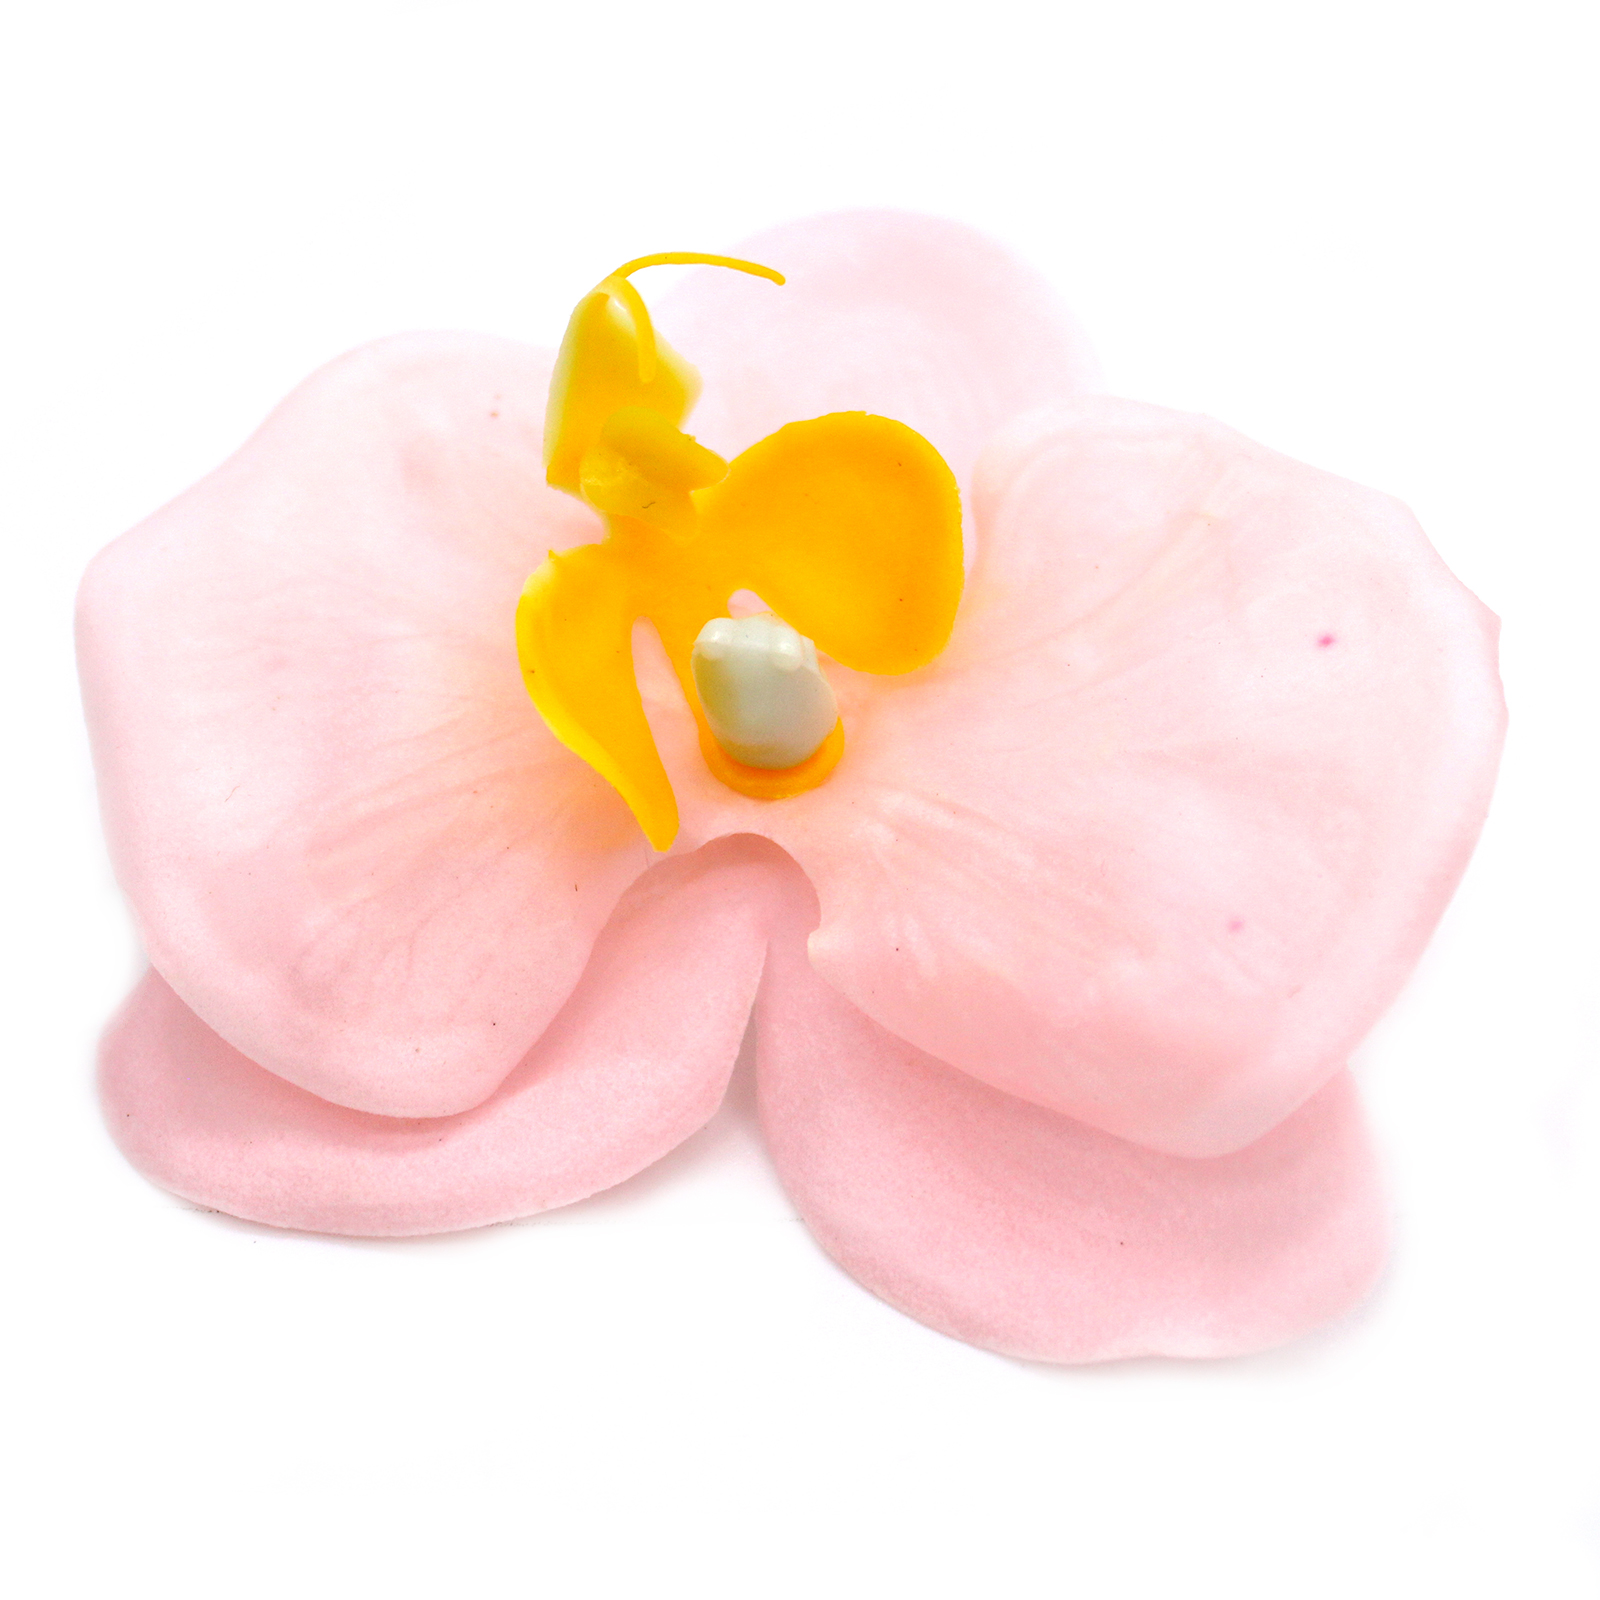 10 x Craft Soap Flowers - Paeonia - Pink